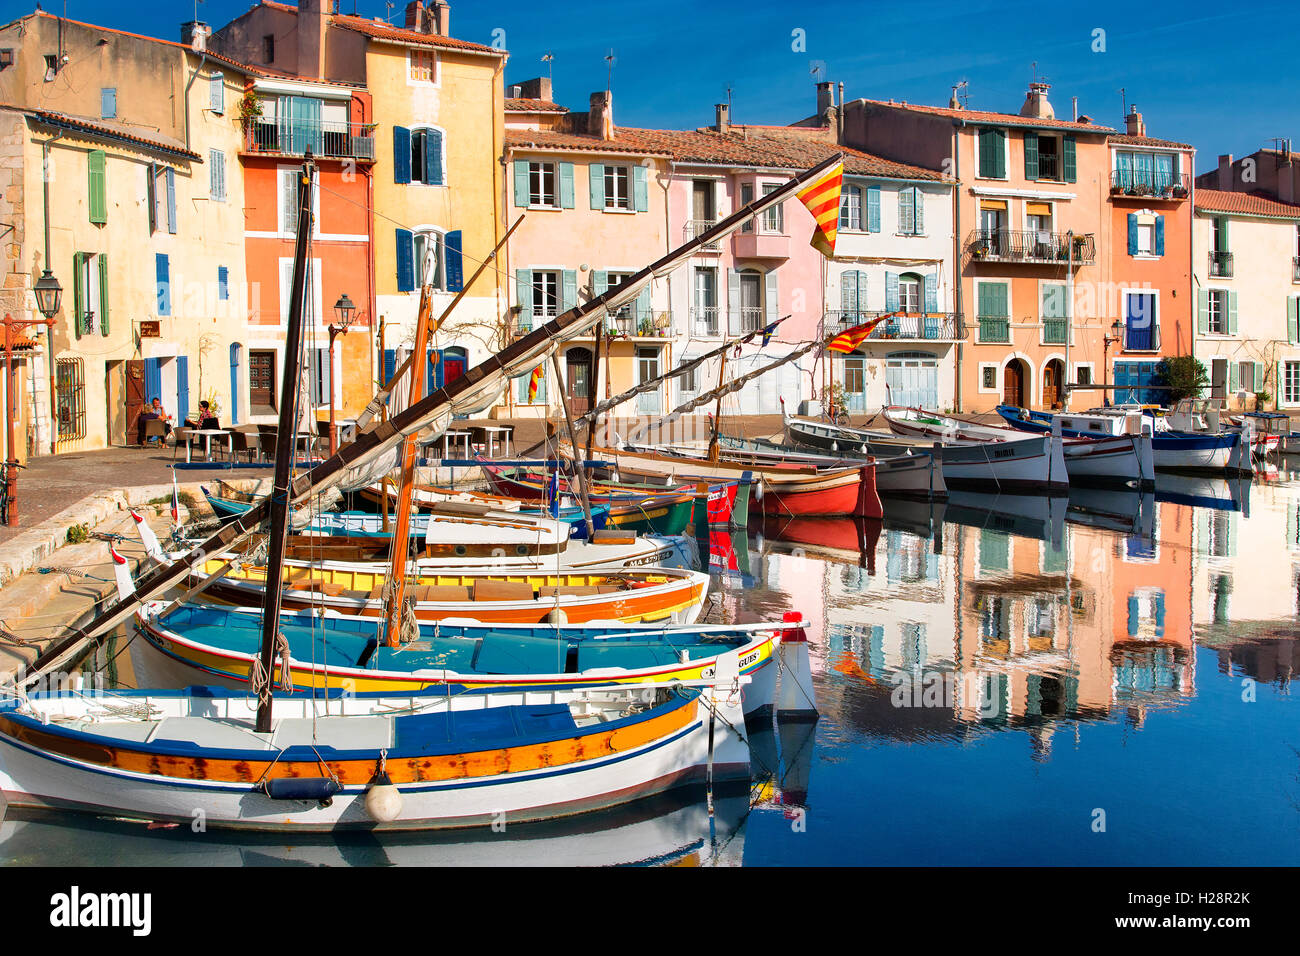 The village of Martigues in Provence, France Stock Photo